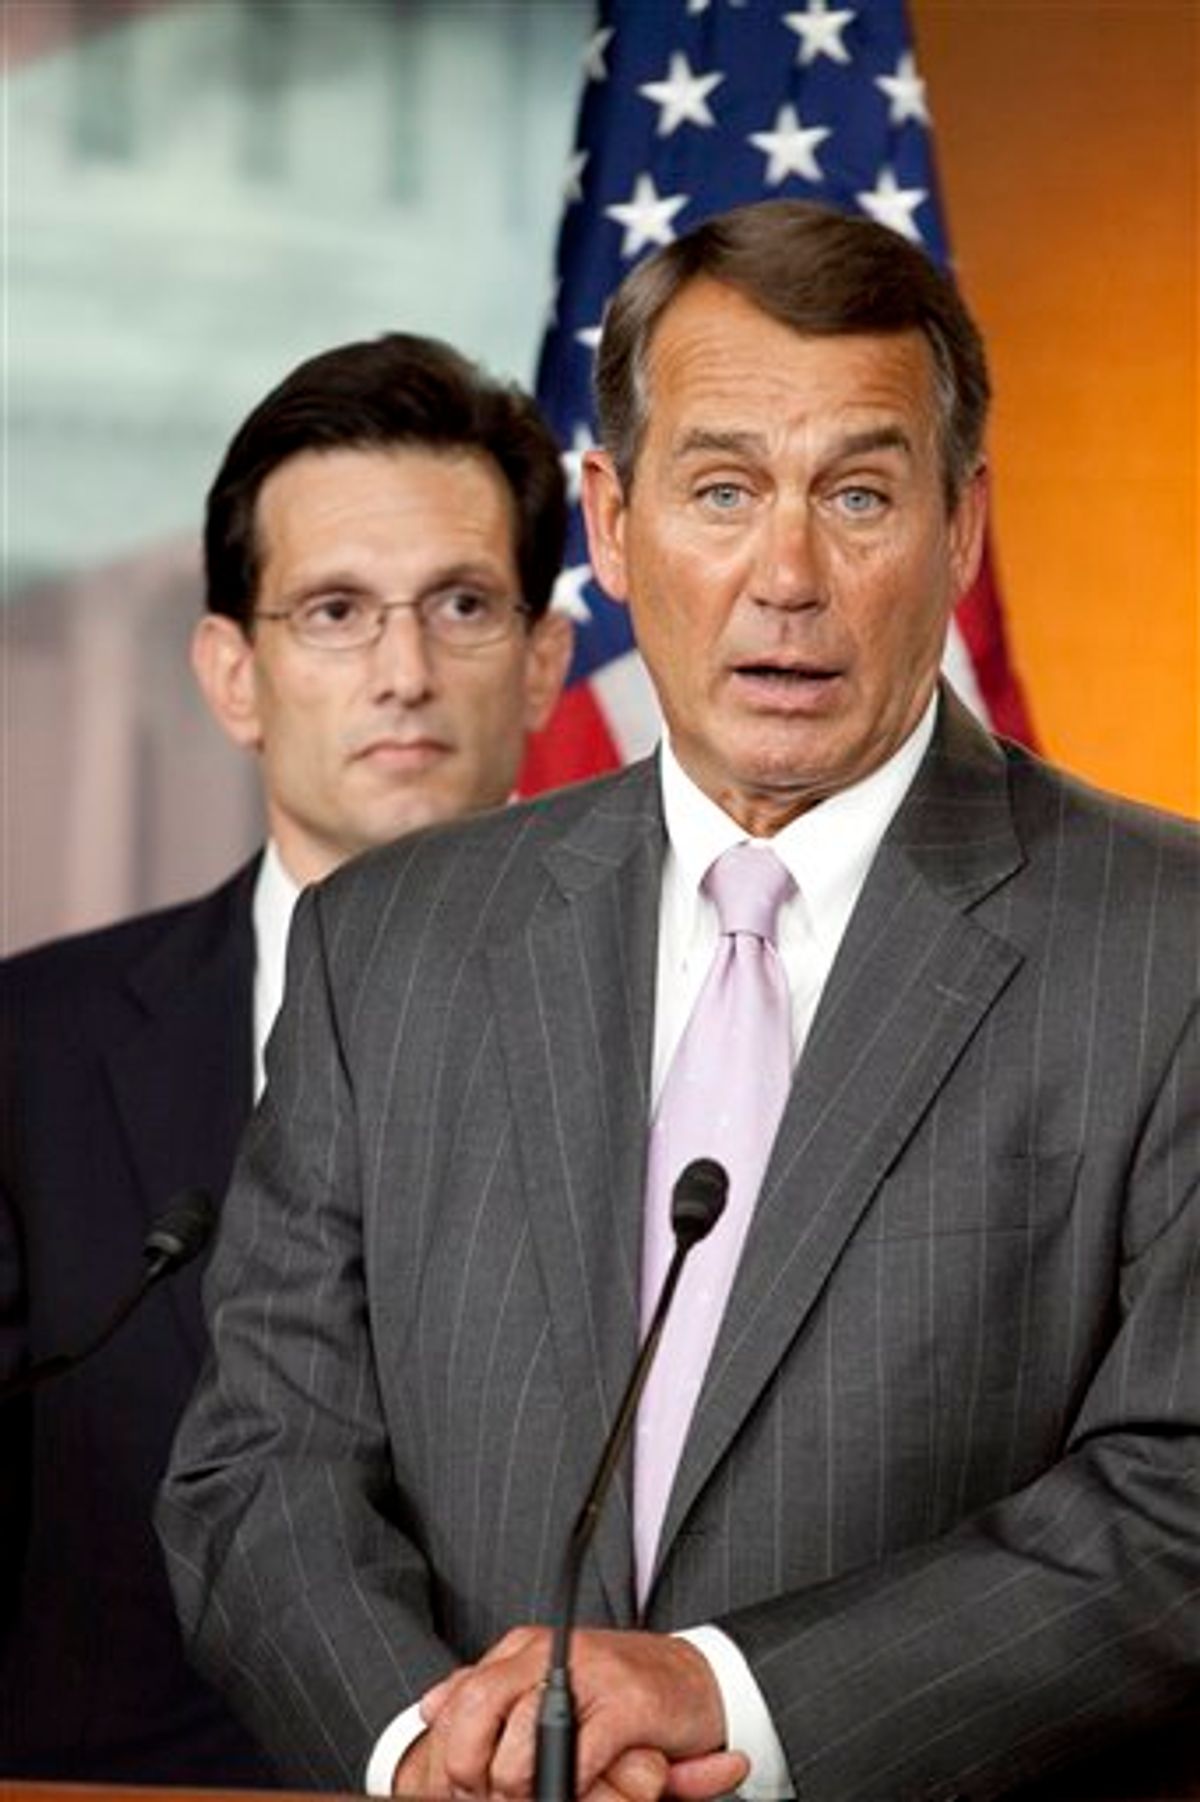 FILE - In this April 5, 2010 file photo, House Minority Leader John Boehner of Ohio, right, accompanied by House Minority Whip Eric Cantor of Va., speaks on Capitol Hill in Washington. Boehner could walk down most U.S. streets anonymously. But the perpetually tanned golf lover, who grew up in a Cincinnati family of 14, could become the next House speaker and the GOP leader of opposition to President Barack Obama.  (AP Photo/Harry Hamburg, File)  (AP)